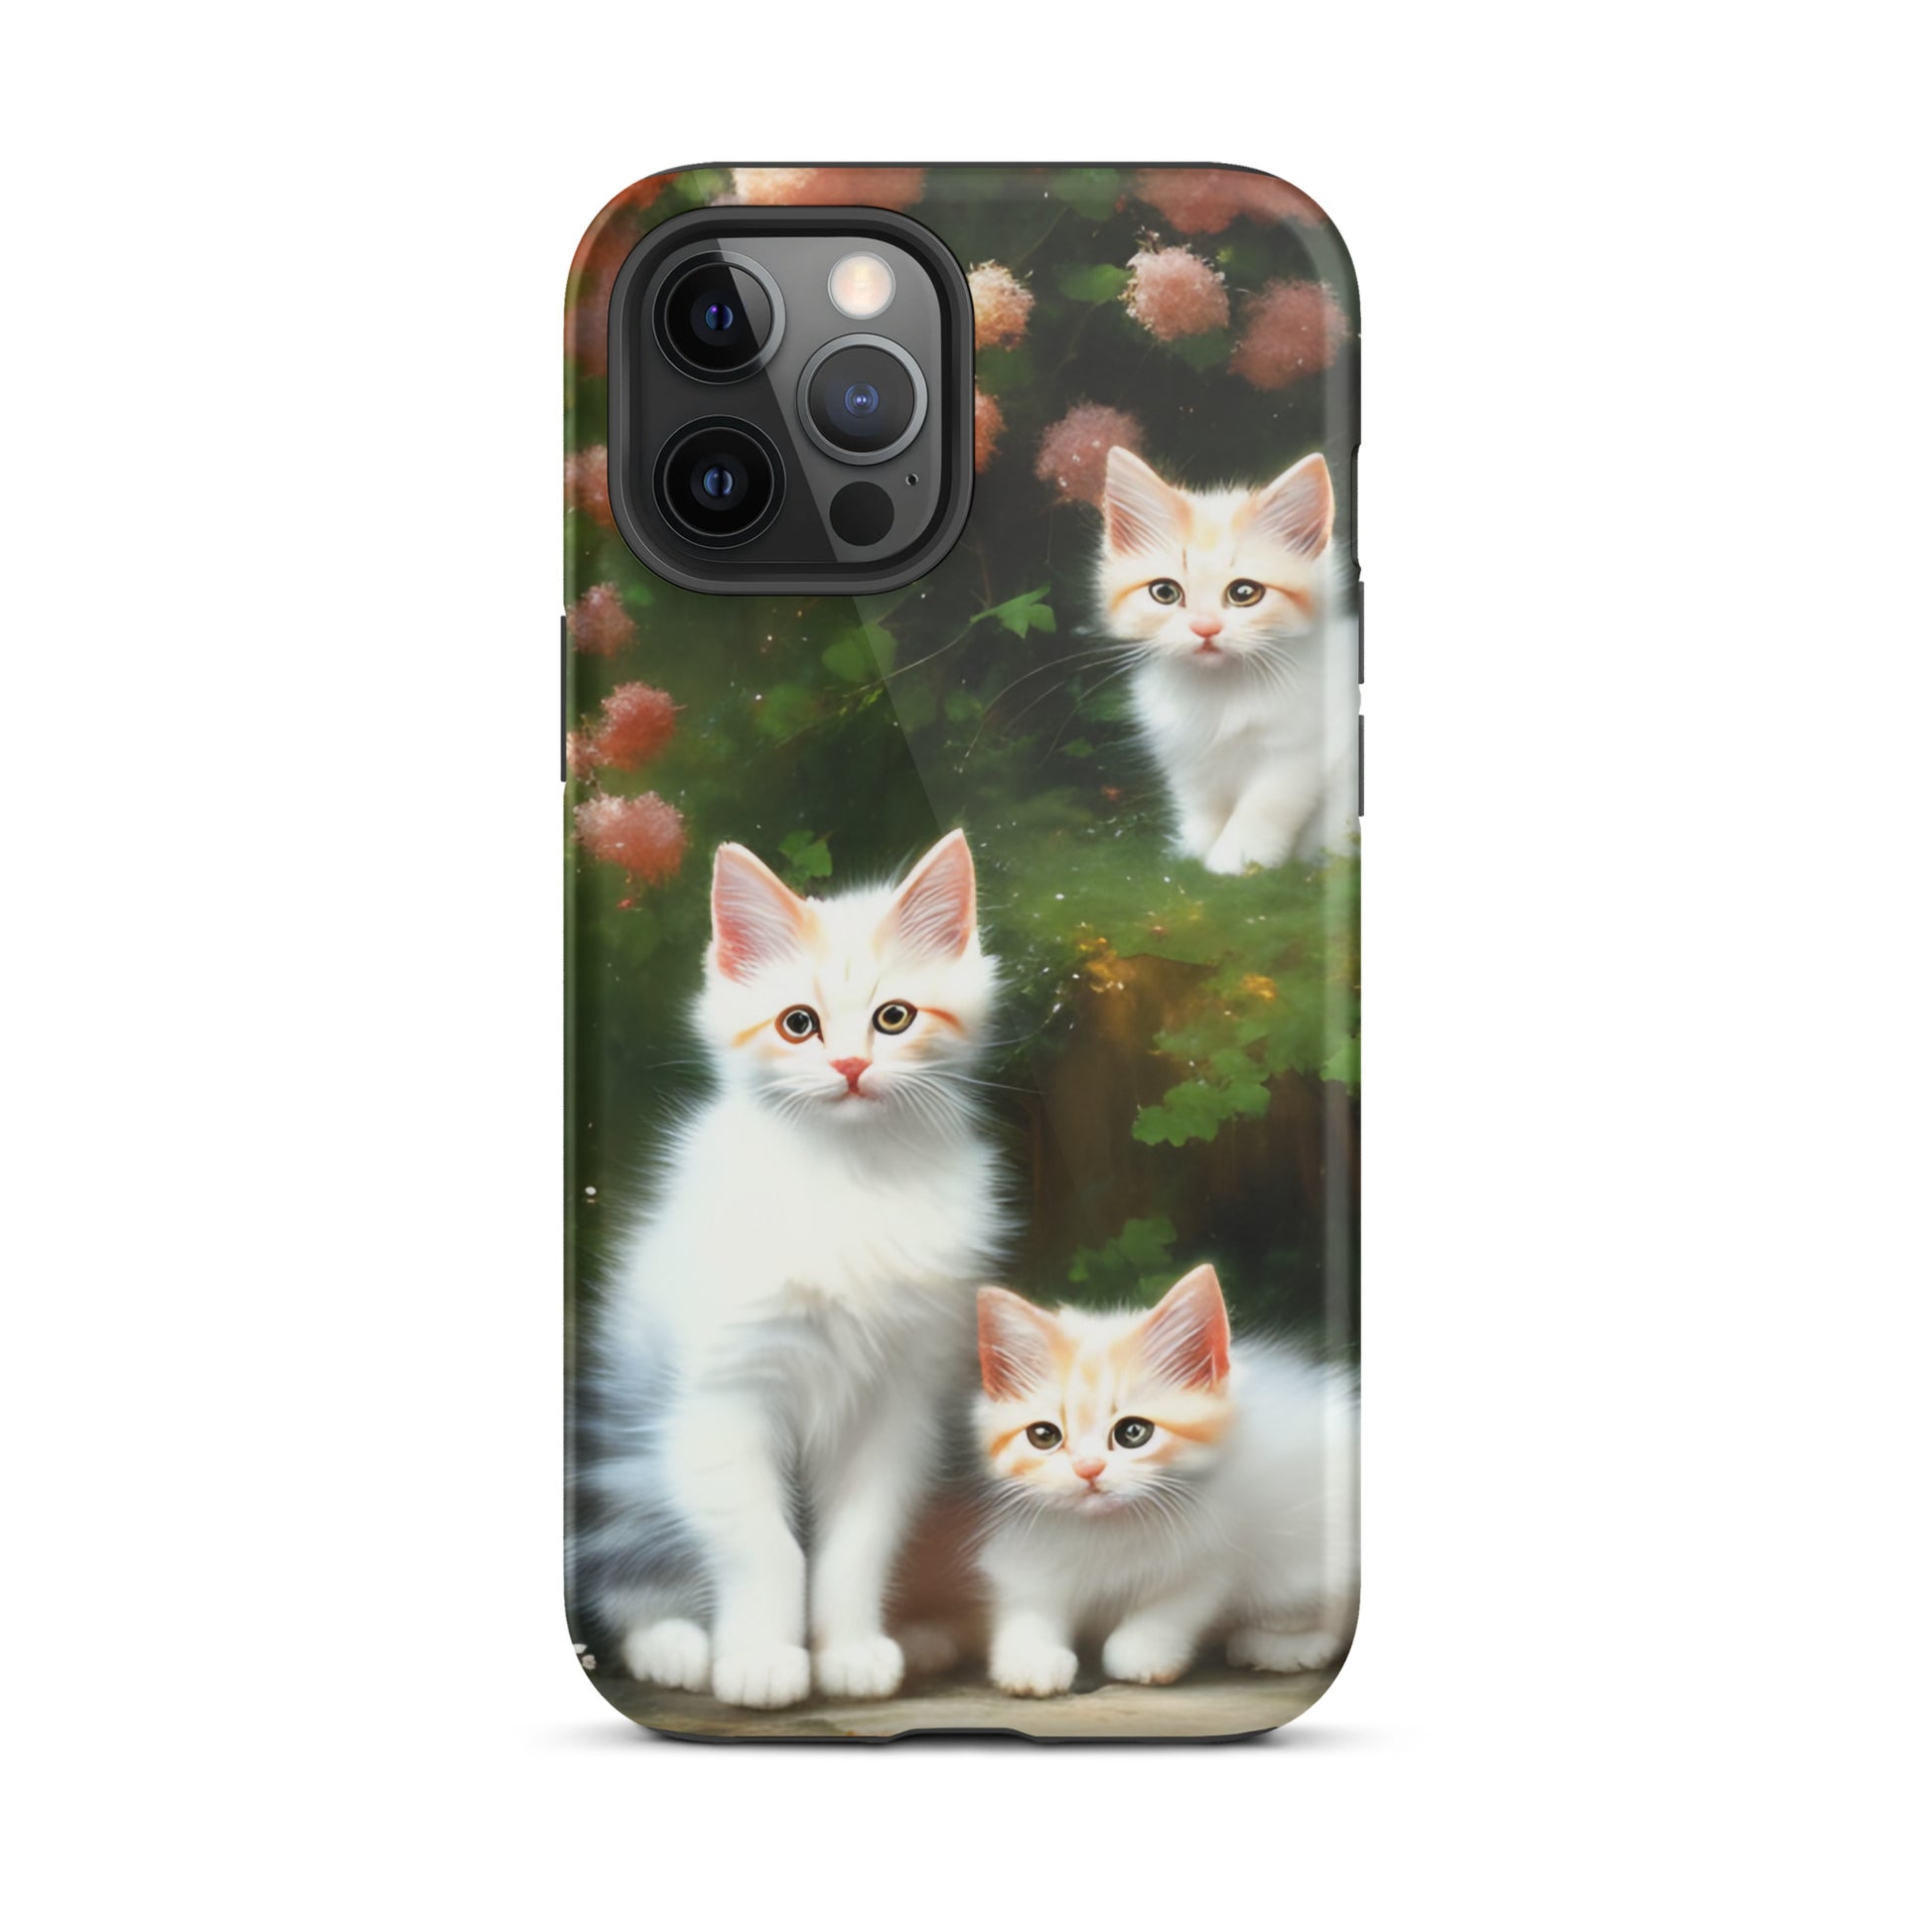 A picture of a iphone tough case with 3 fluffy white and orange kittens and peach colored flowers in the background - glossy-iphone-12-pro-max-front